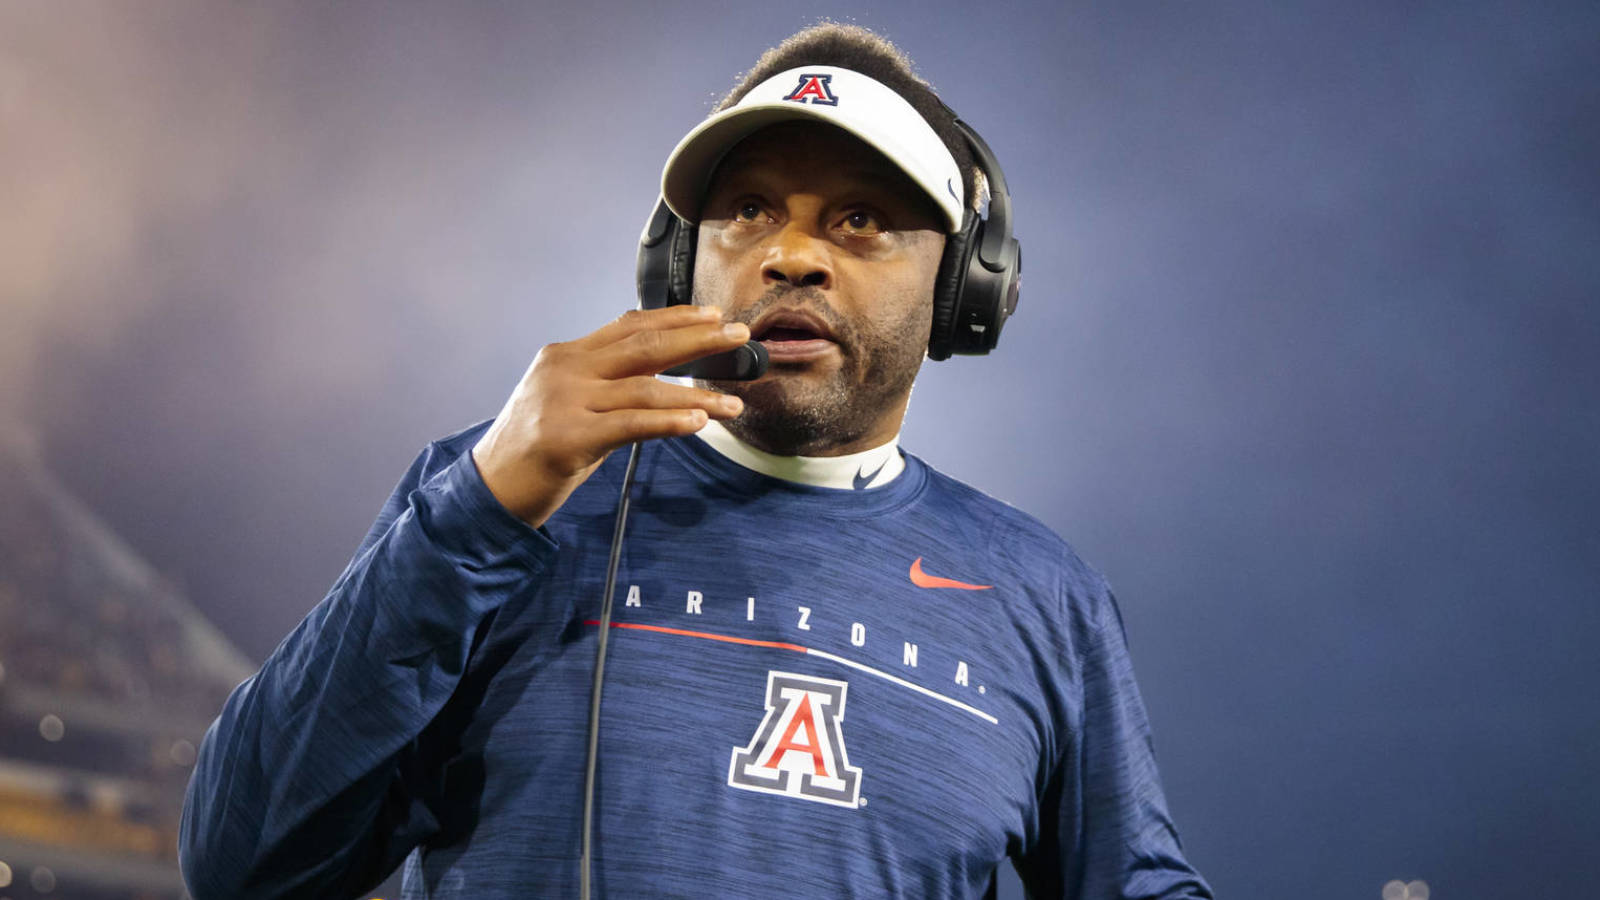 Kevin Sumlin, Todd Haley among announced USFL coaches